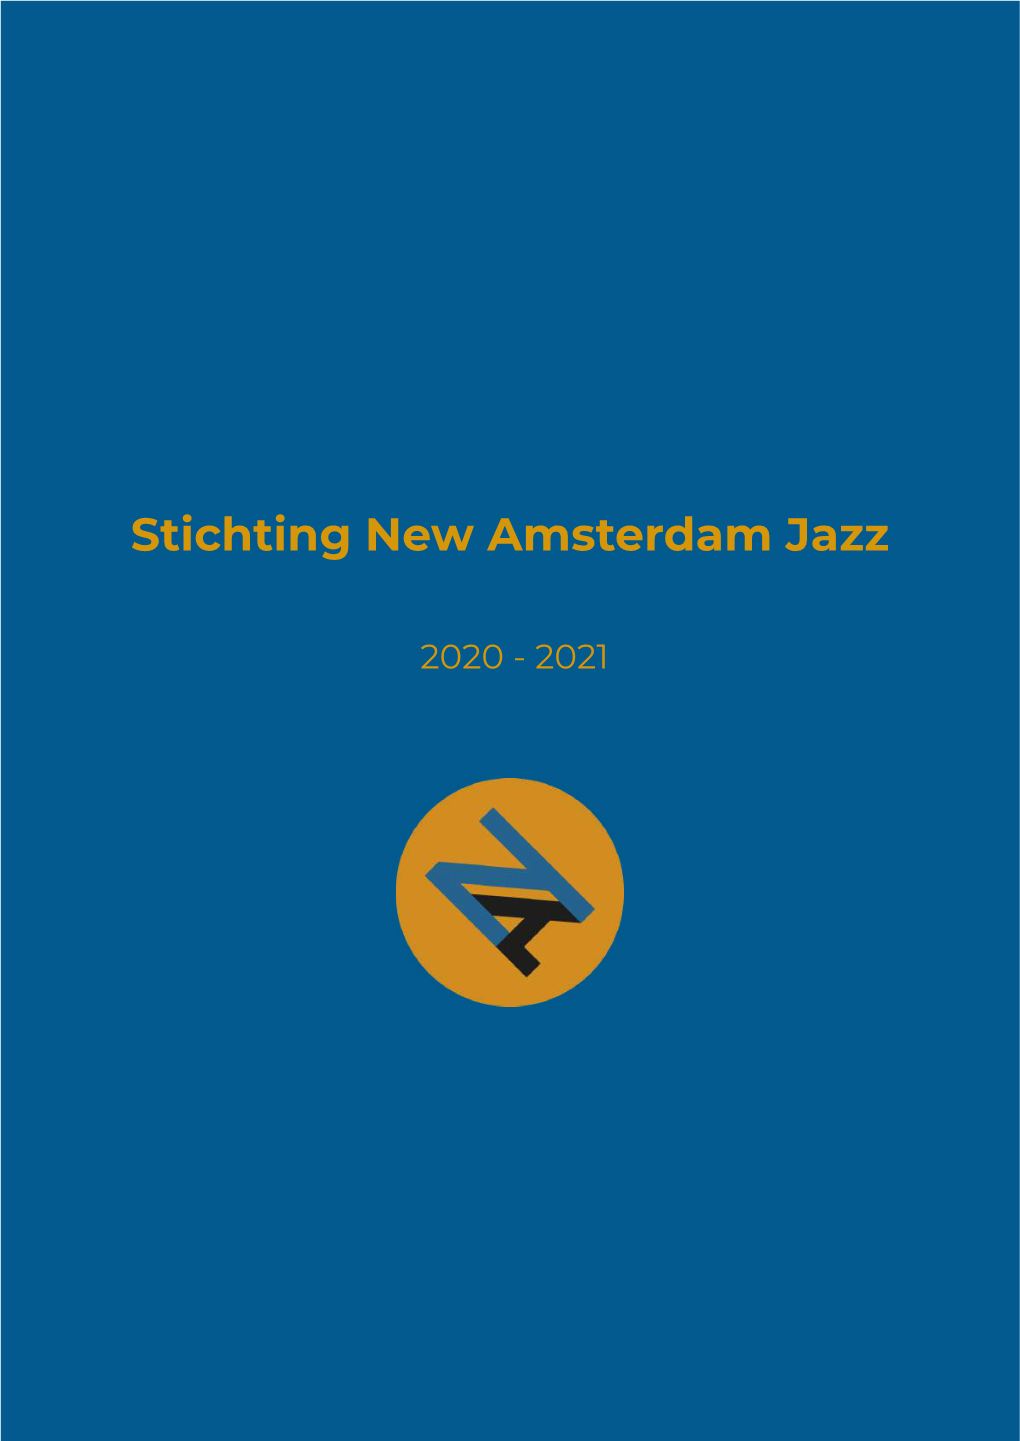 2020 - 2021 About New Amsterdam Jazz